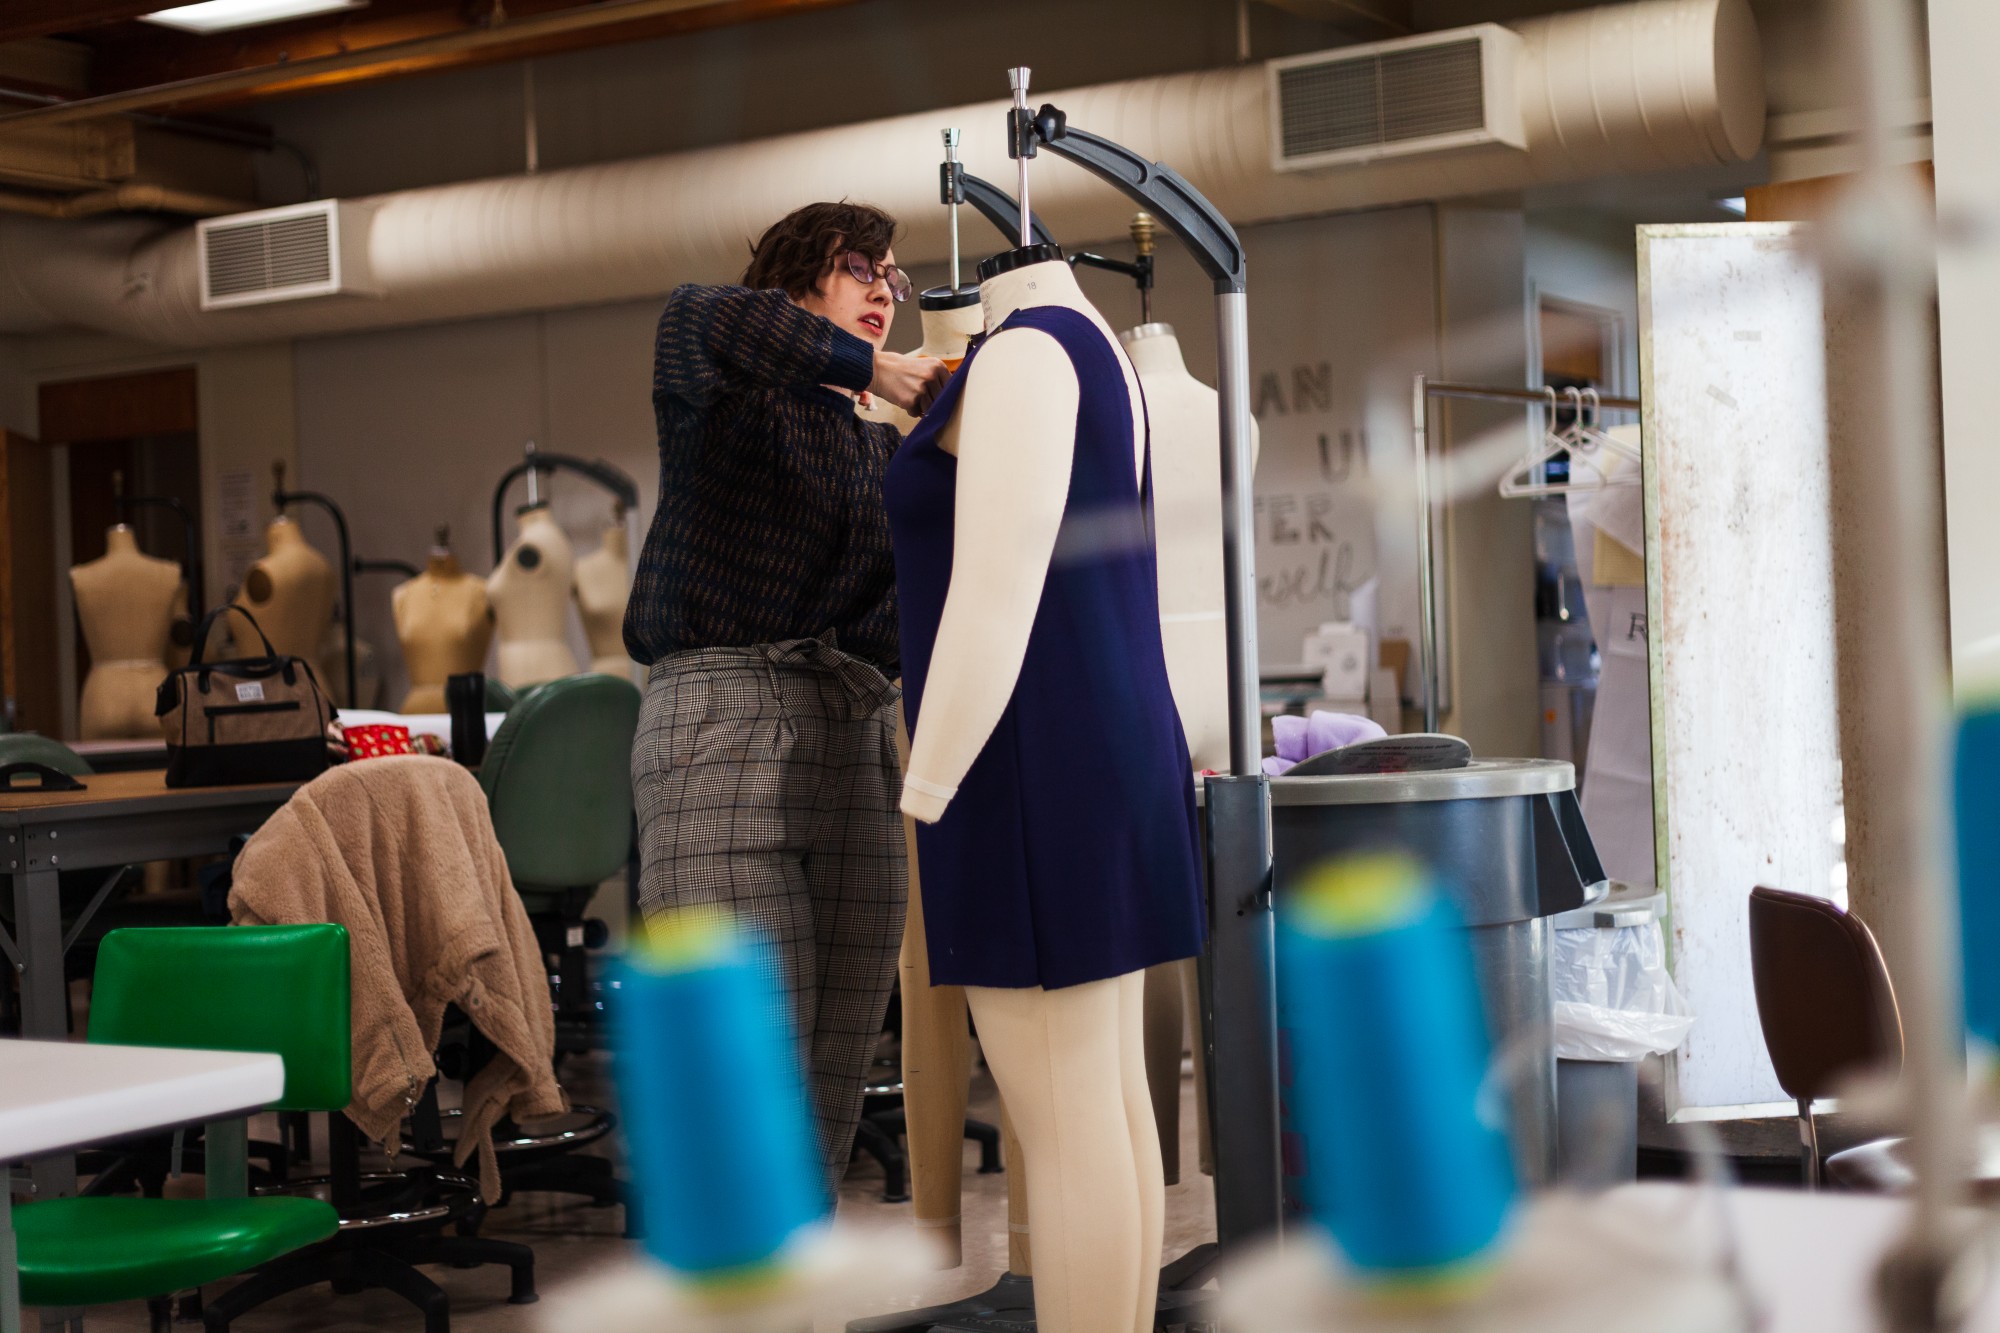 Maxine Britt pins a piece from her upcoming line on a size eighteen mannequin. The University of Minnesota employs a myriad of mannequin body shapes which are an indispensable tool for increasing accessibility to apparel that supports positive personal identity. 